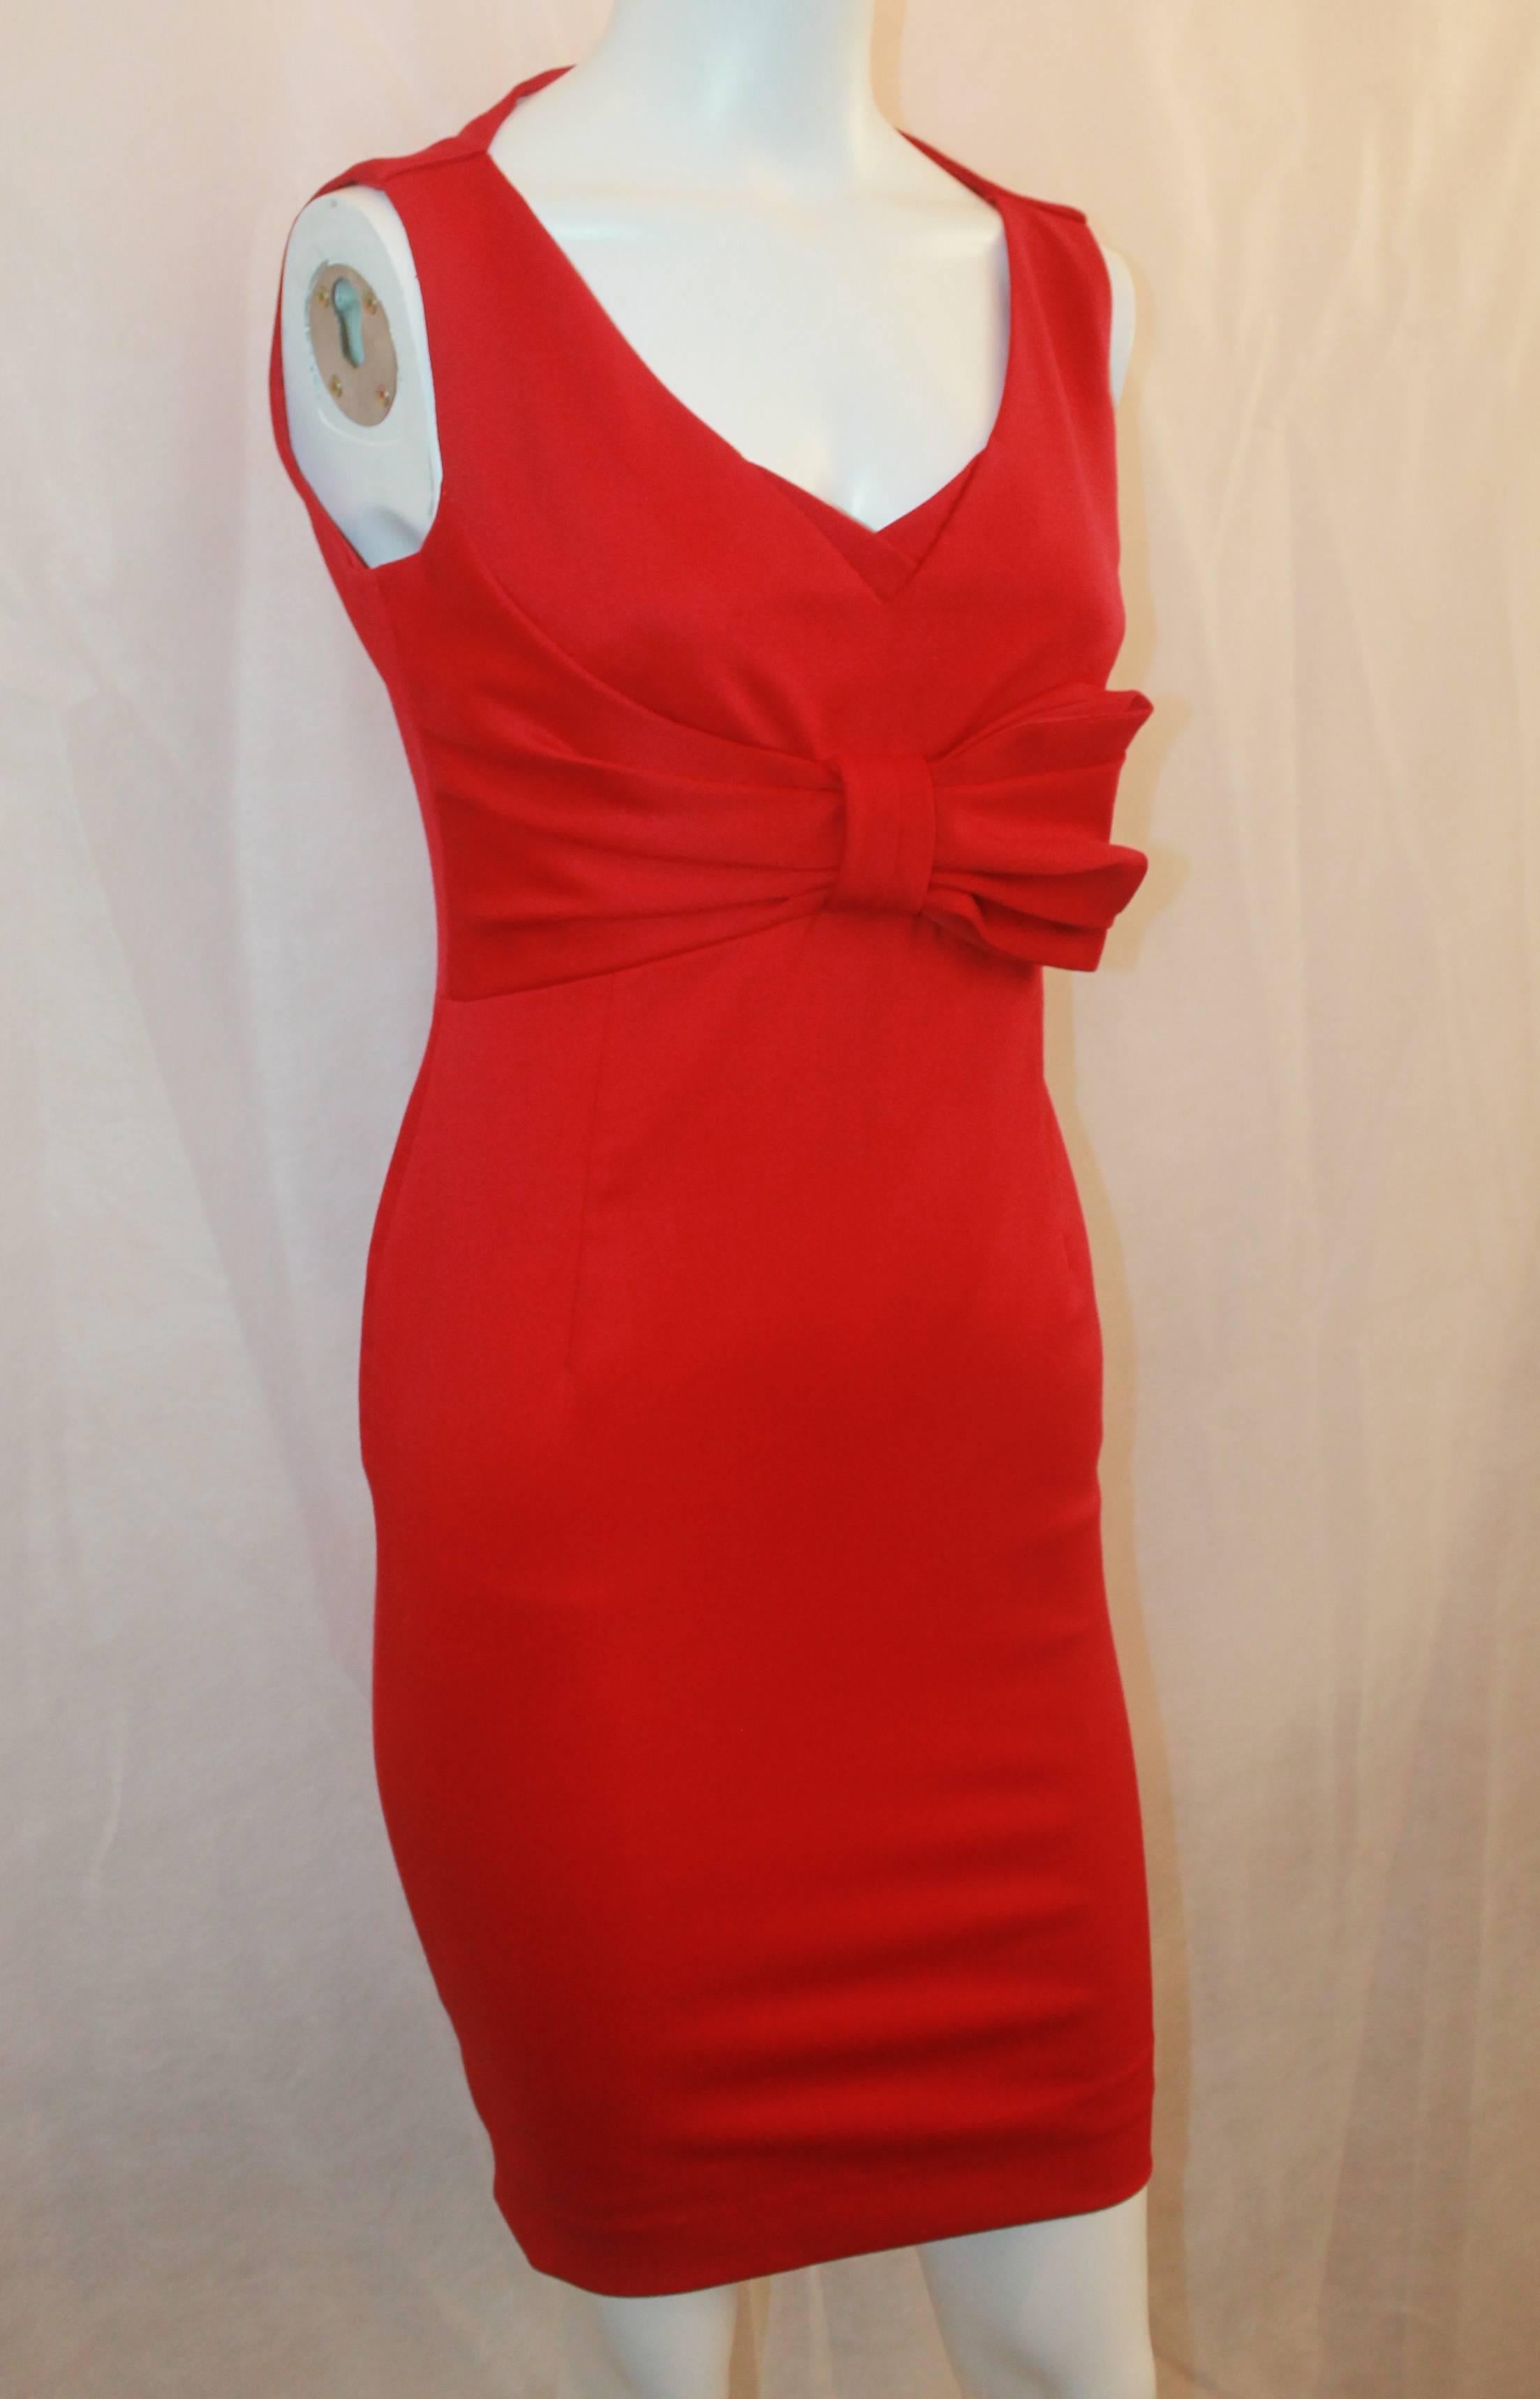 Valentino Techno Couture Red Sleeveless Dress with Bow - 4. This beautiful dress is in excellent condition and is a perfect sexy and elegant piece. It features a v-neck, bow design in the front, and a fitted bodice. The dress is a wool-jersey heavy